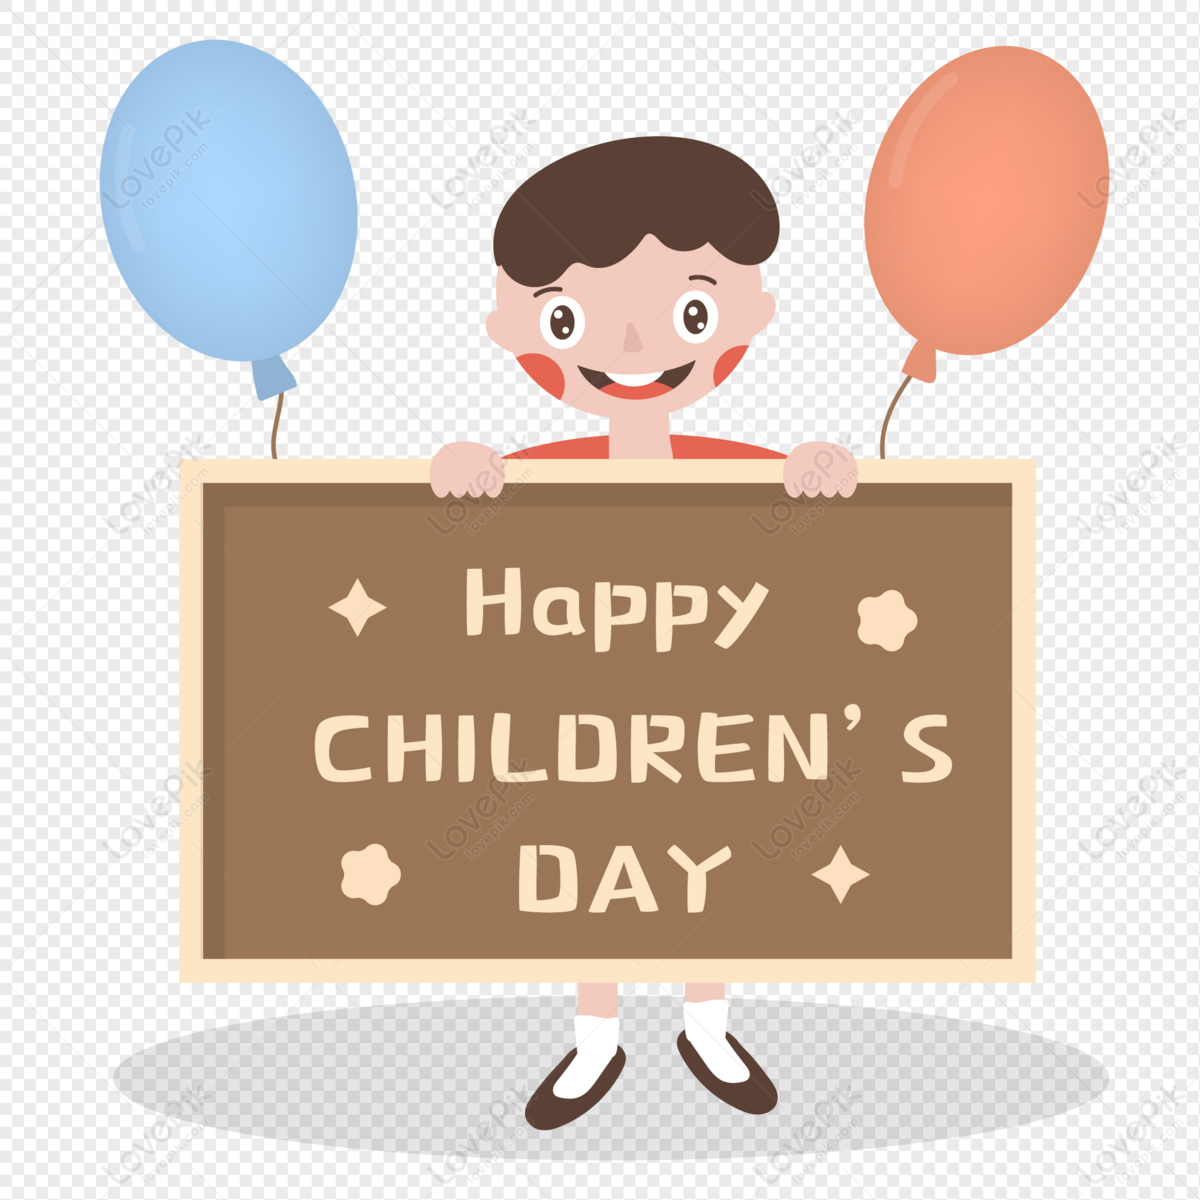 Happy Childrens Day PNG Hd Transparent Image And Clipart Image For ...